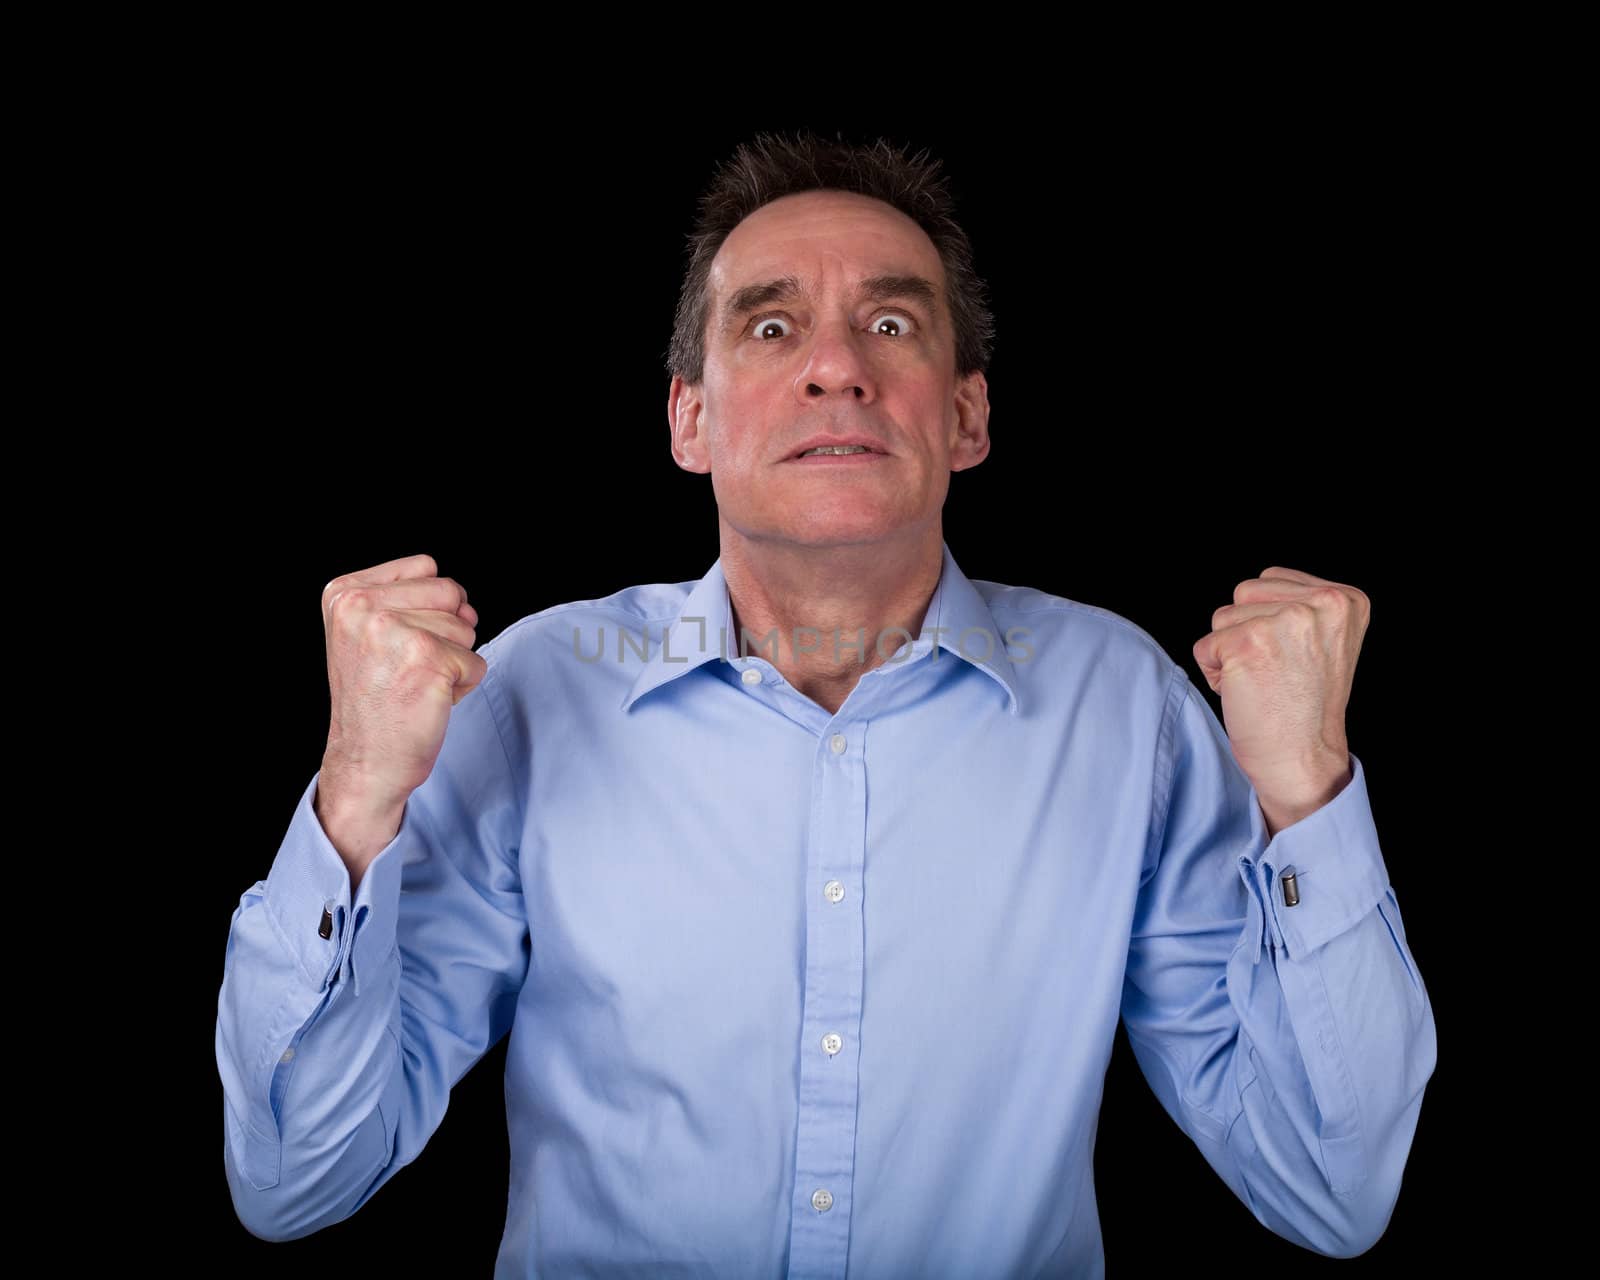 Frustrated Middle Age Business Man Shaking Fists in Anger Black Background